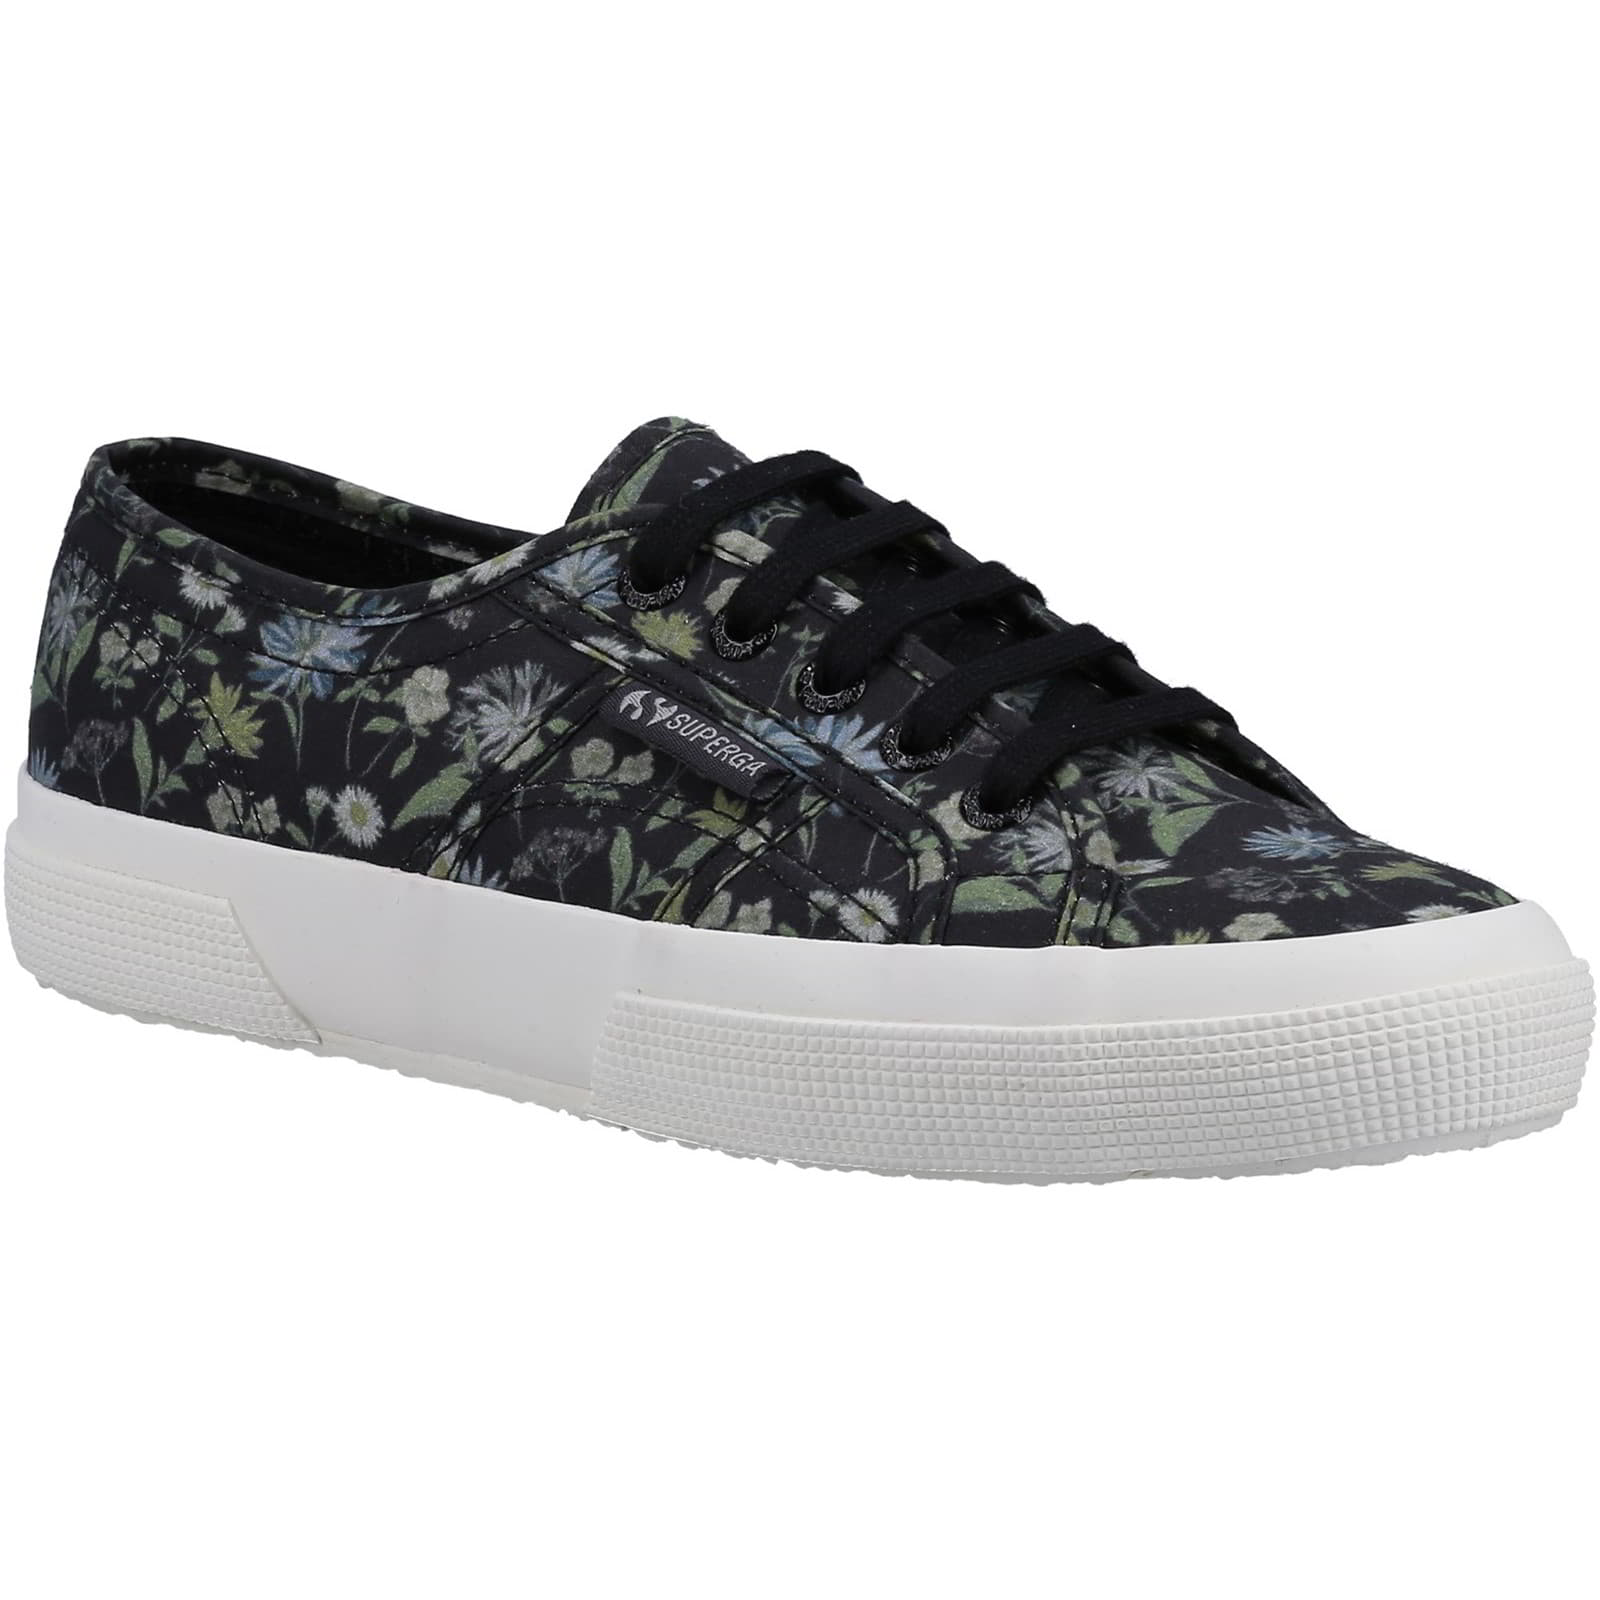 Superga Women's 2750 Floral Print Lace Up Trainers Shoes - UK 6